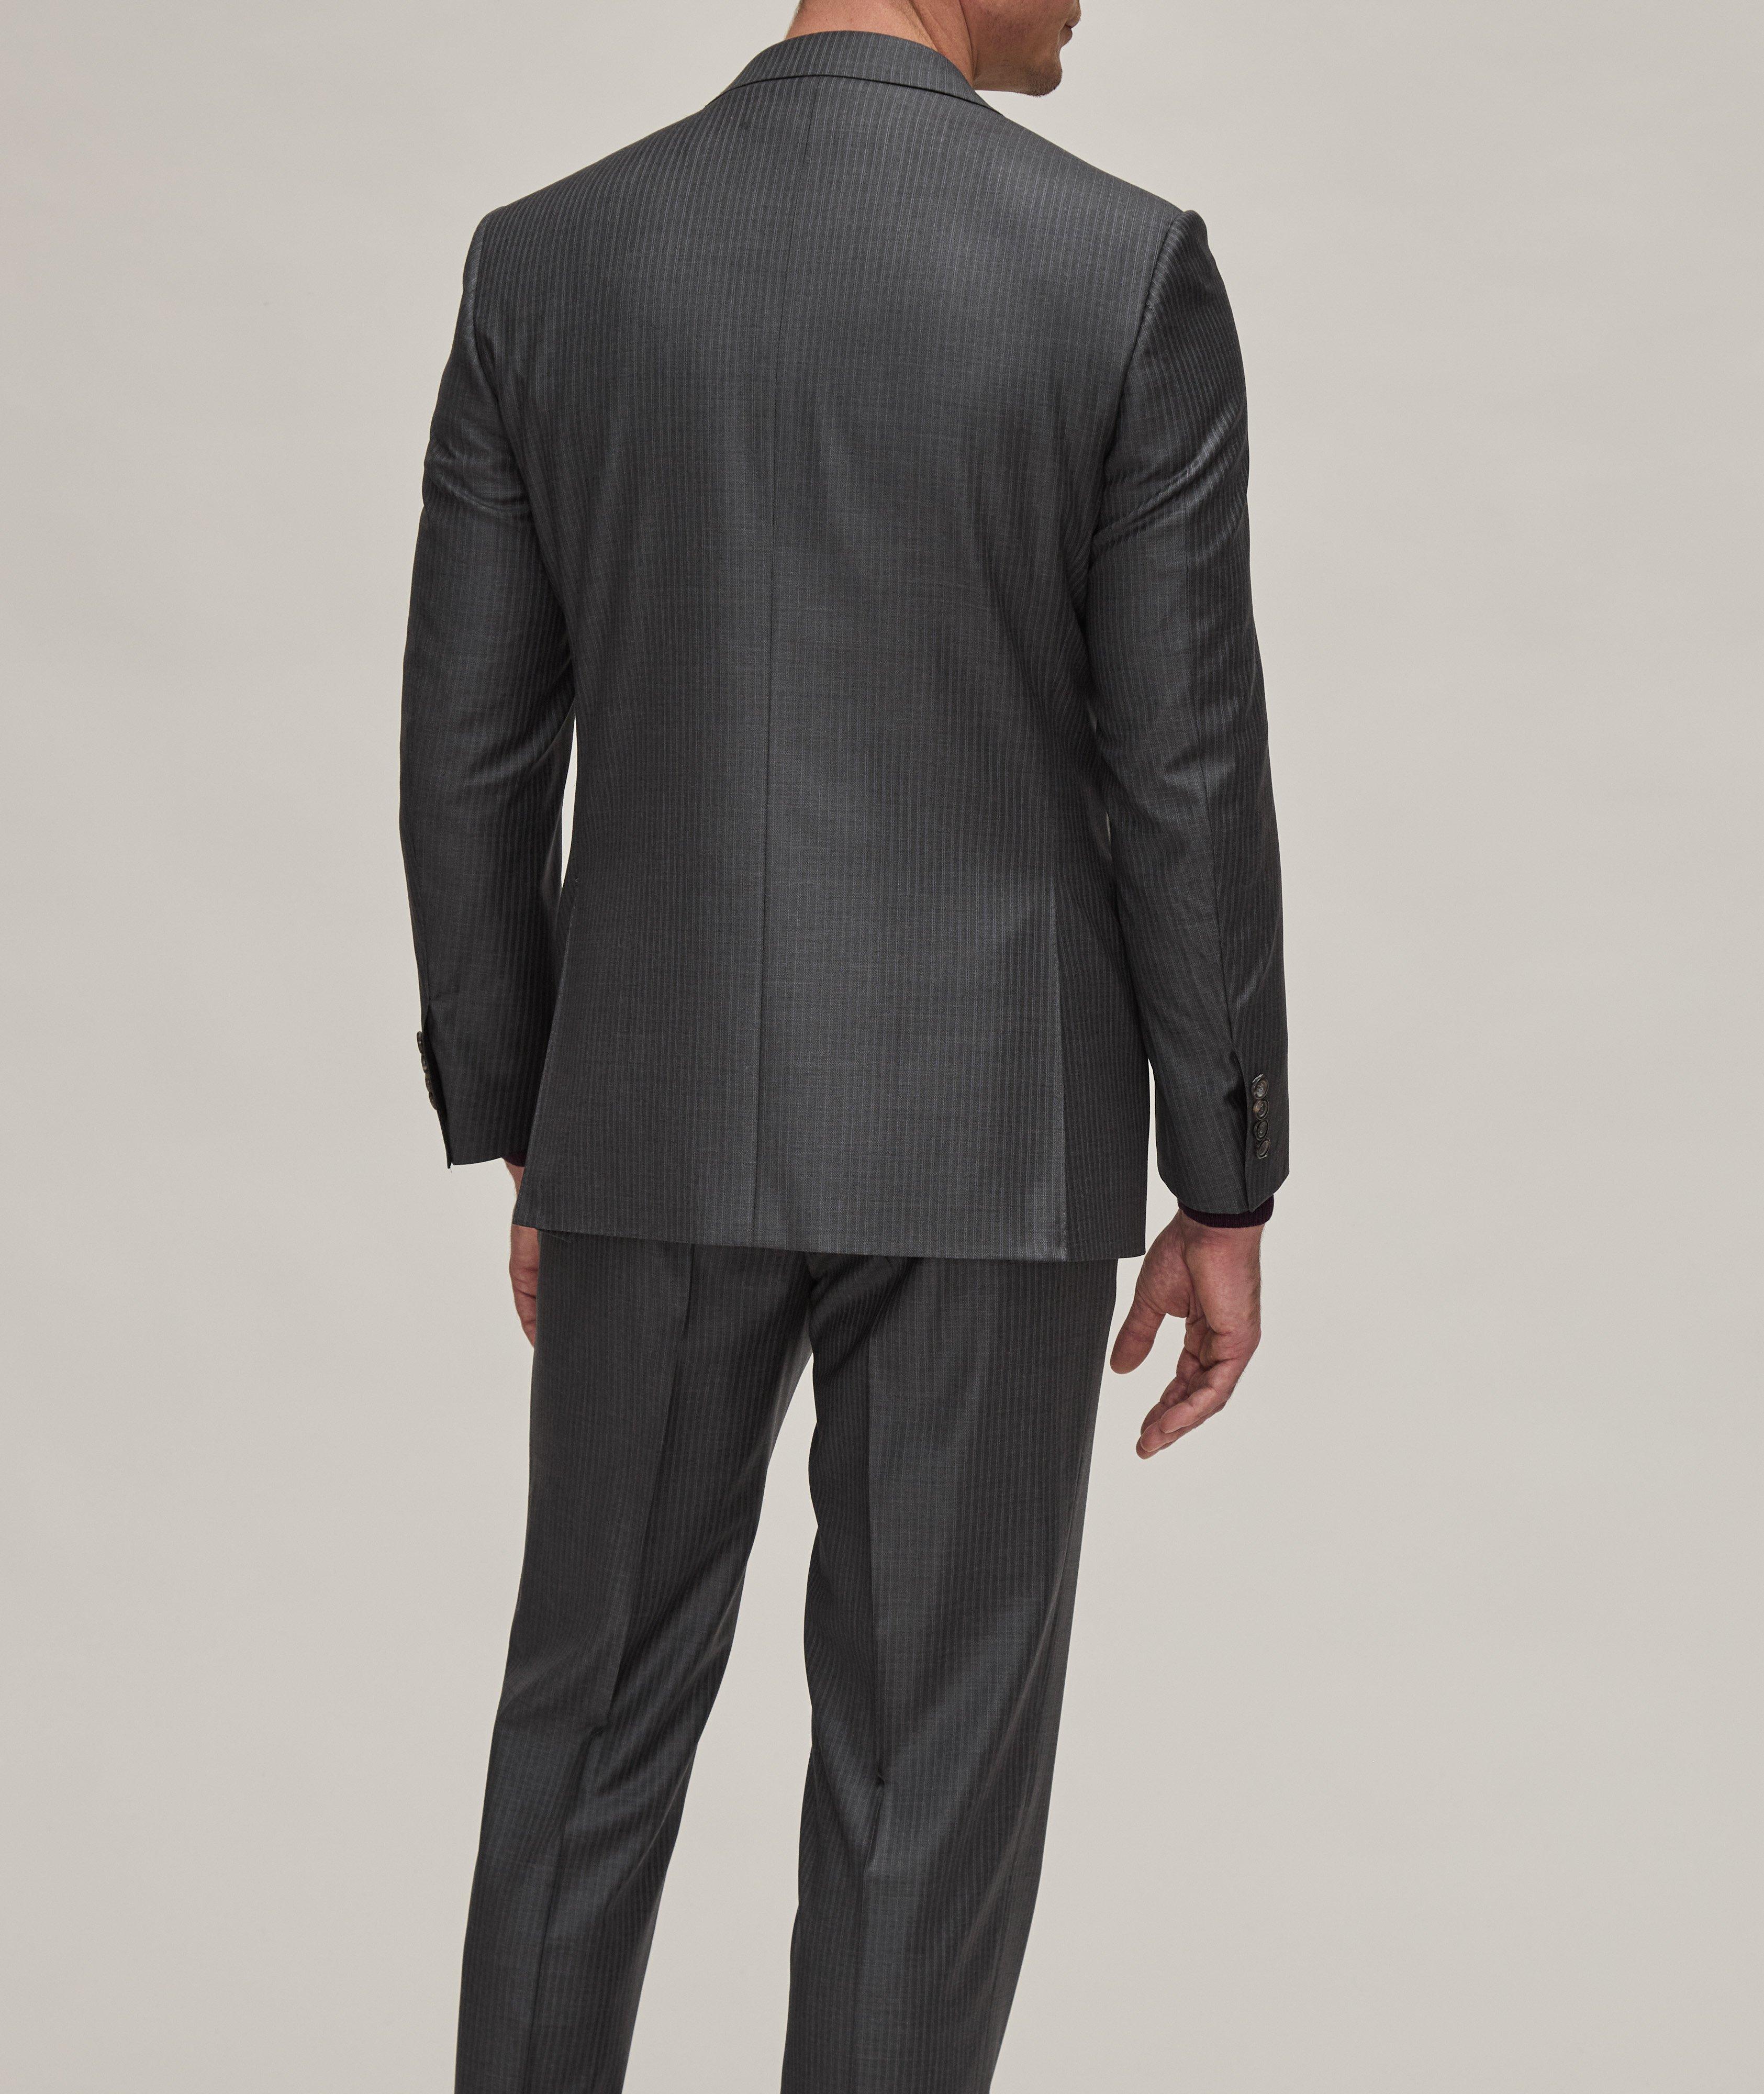 Contemporary Line Pinstripe Wool Suit image 2